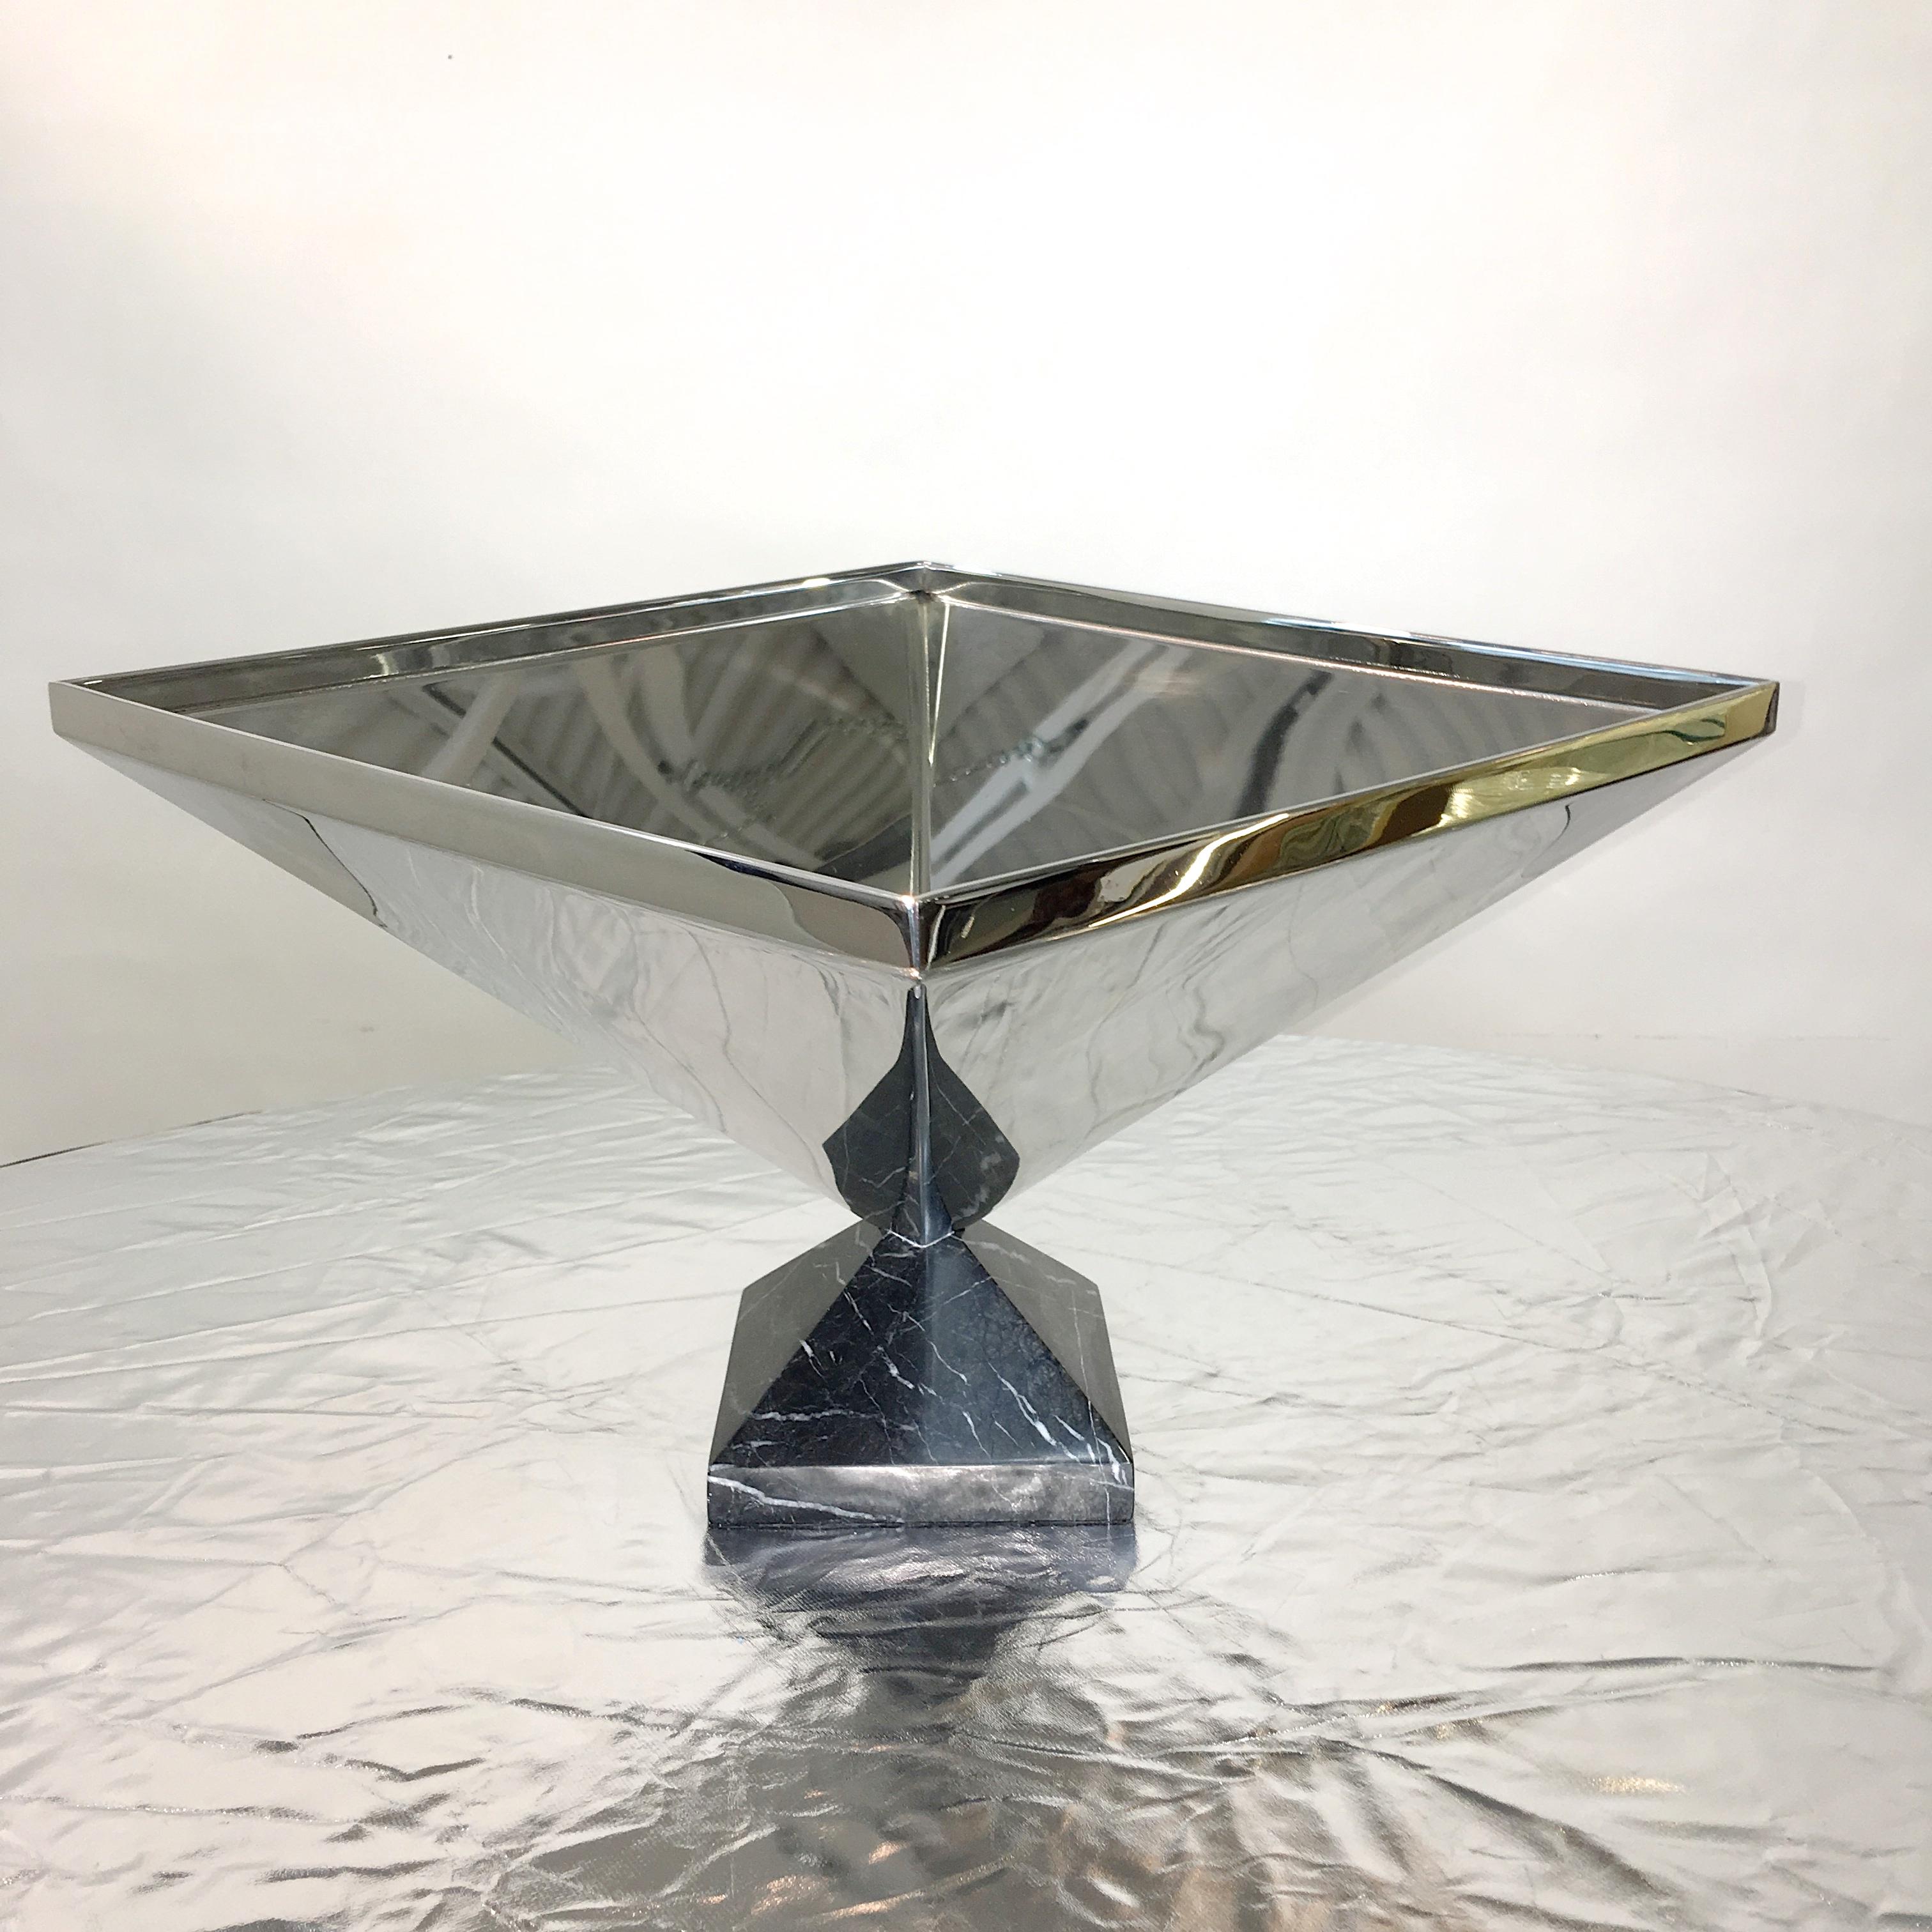 Sculptural mirror polished stainless steel centerpiece bowl or vase handcrafted in the form of an inverted pyramid standing point to point on a nero marquina marble base also in pyramidal form though smaller. 

Unmarked but attributed to